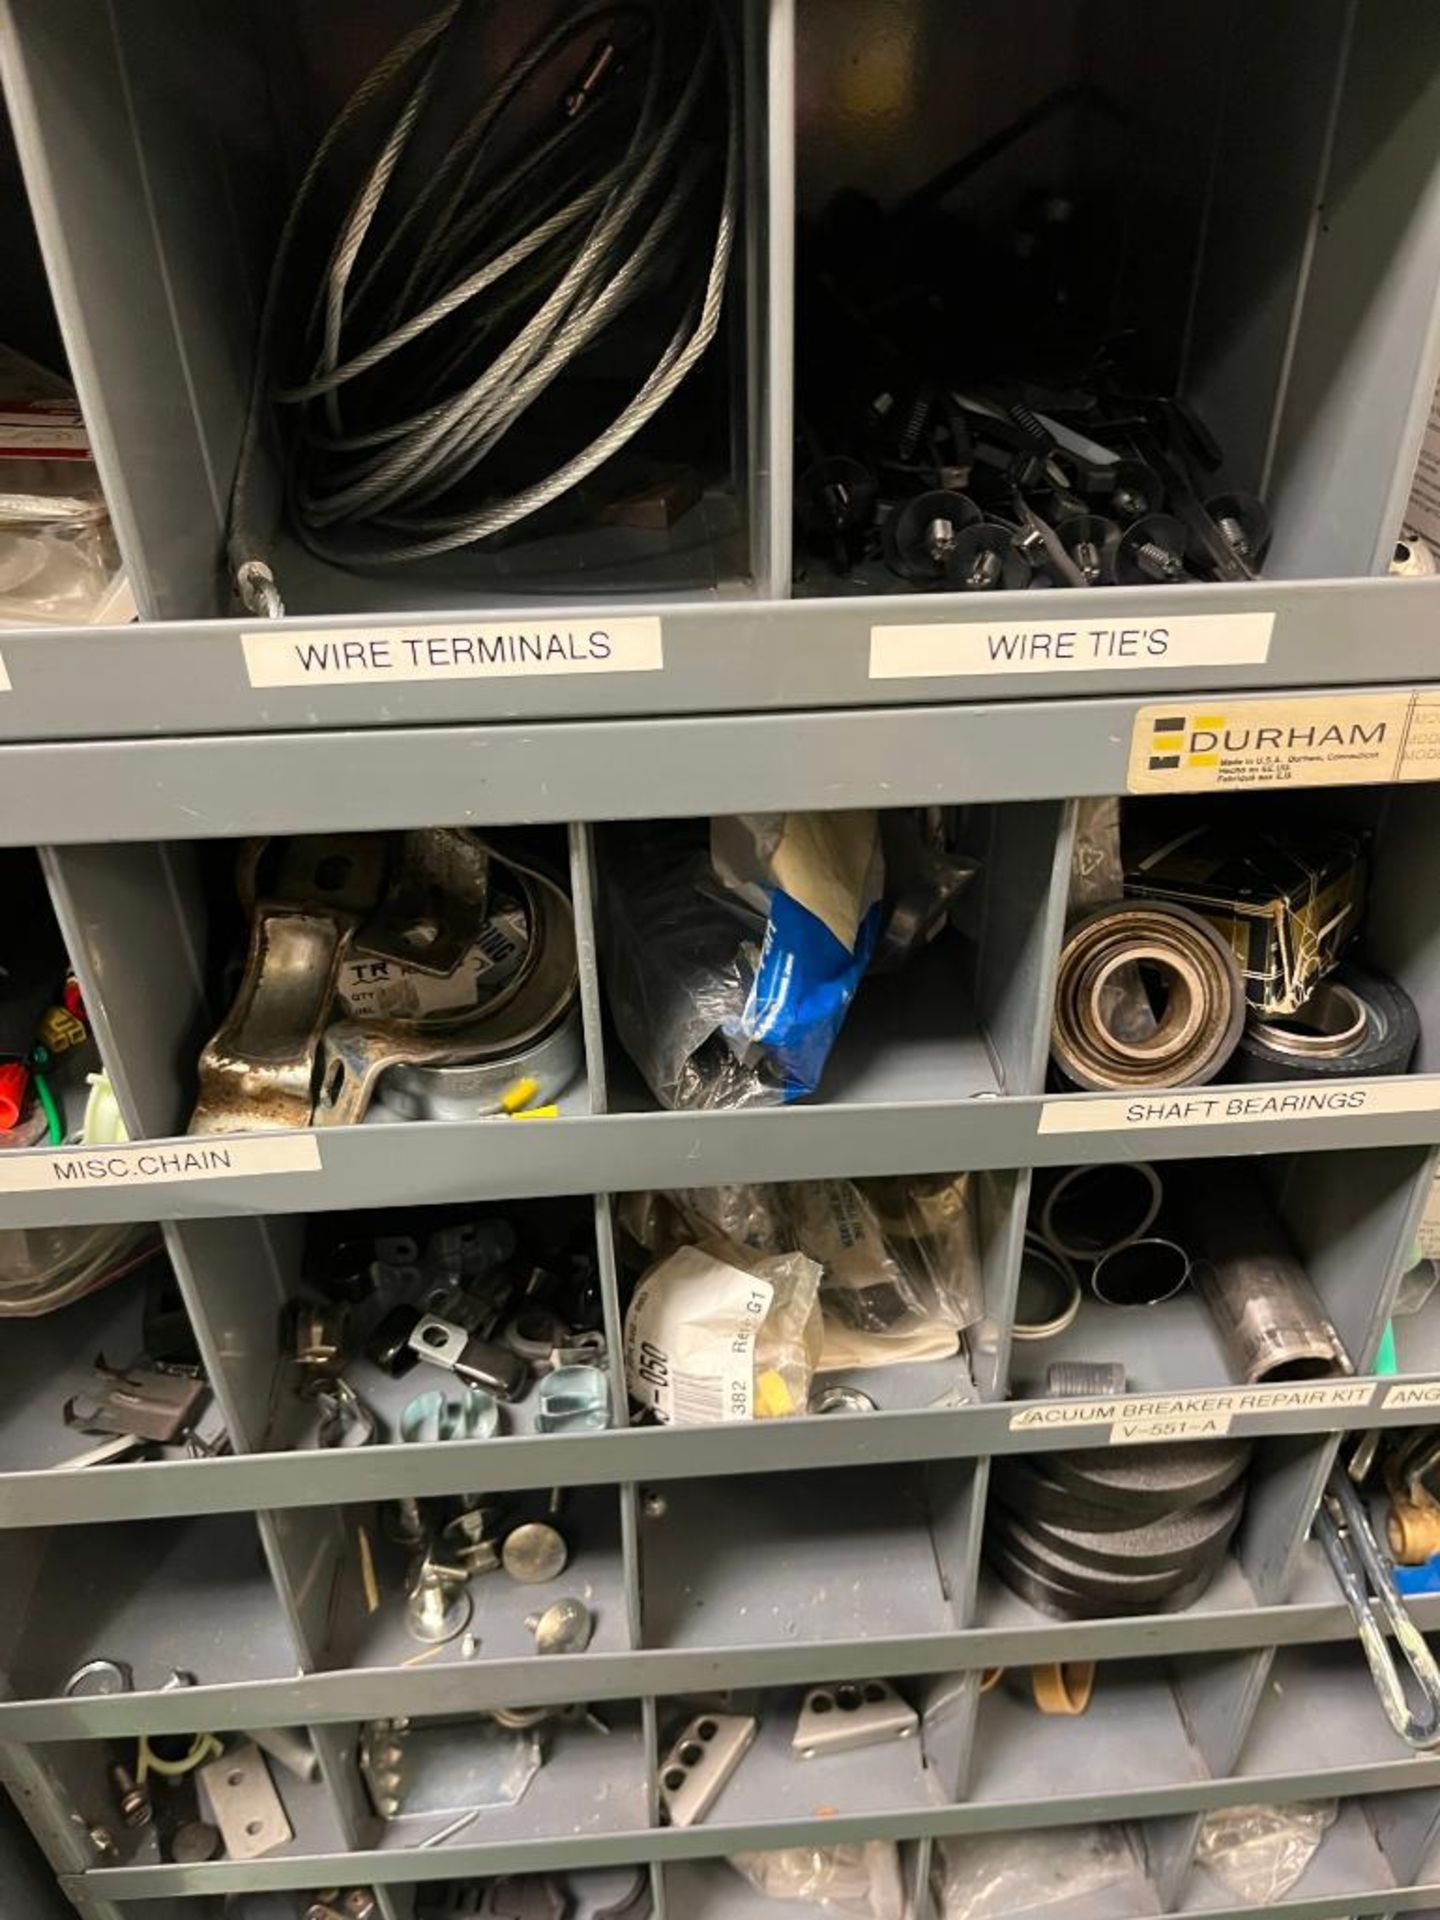 Contents of Maintenance Repair Room; Electrical Wire, Fittings, Chain, Breakers, Relays, Plug Ends, - Image 26 of 65